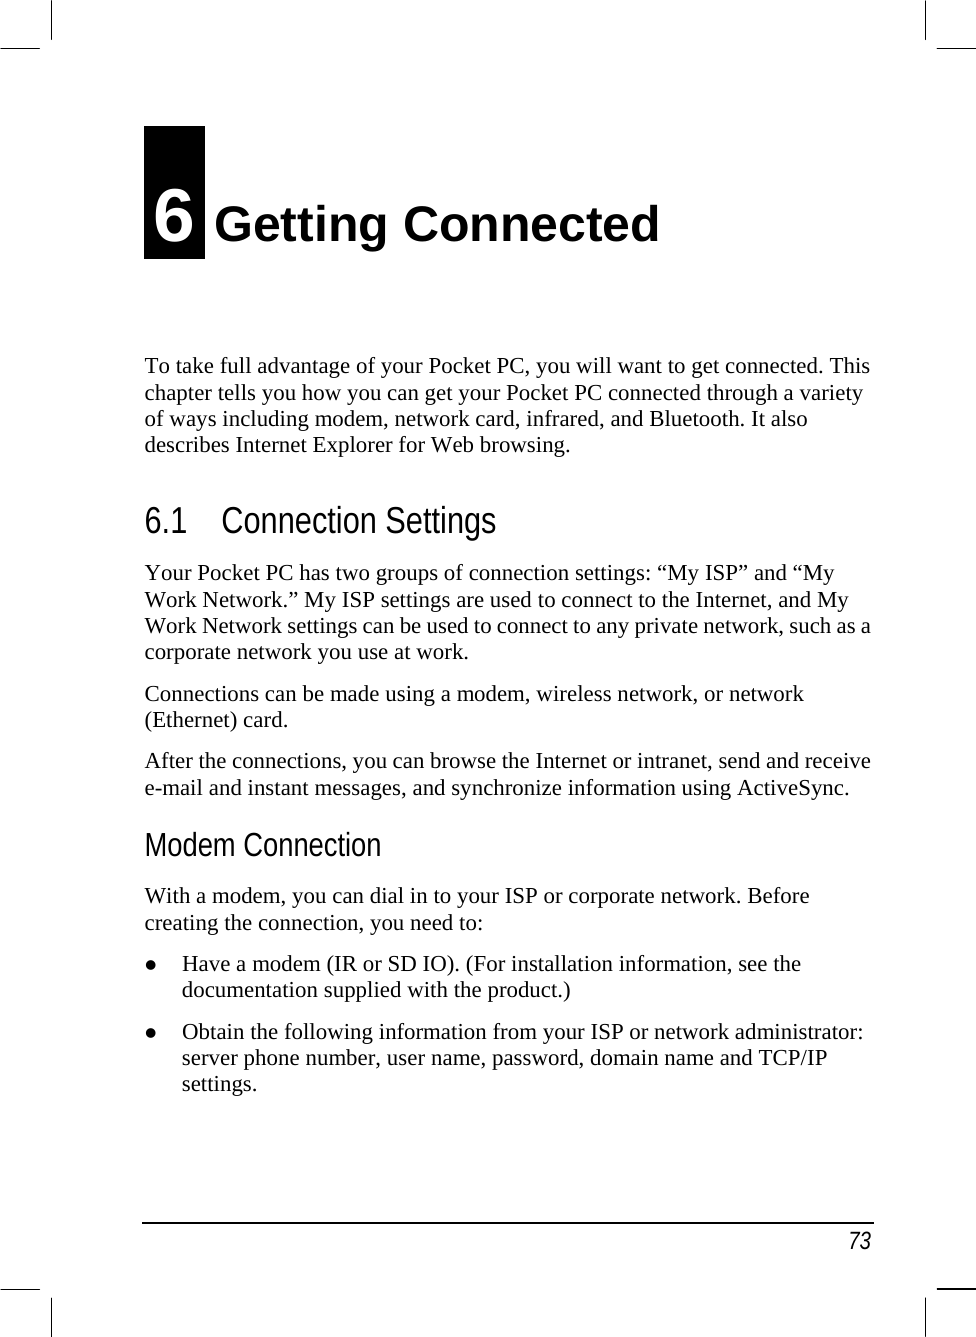   73 6 Getting Connected To take full advantage of your Pocket PC, you will want to get connected. This chapter tells you how you can get your Pocket PC connected through a variety of ways including modem, network card, infrared, and Bluetooth. It also describes Internet Explorer for Web browsing. 6.1 Connection Settings Your Pocket PC has two groups of connection settings: “My ISP” and “My Work Network.” My ISP settings are used to connect to the Internet, and My Work Network settings can be used to connect to any private network, such as a corporate network you use at work. Connections can be made using a modem, wireless network, or network (Ethernet) card. After the connections, you can browse the Internet or intranet, send and receive e-mail and instant messages, and synchronize information using ActiveSync. Modem Connection With a modem, you can dial in to your ISP or corporate network. Before creating the connection, you need to:   Have a modem (IR or SD IO). (For installation information, see the documentation supplied with the product.)   Obtain the following information from your ISP or network administrator: server phone number, user name, password, domain name and TCP/IP settings.   